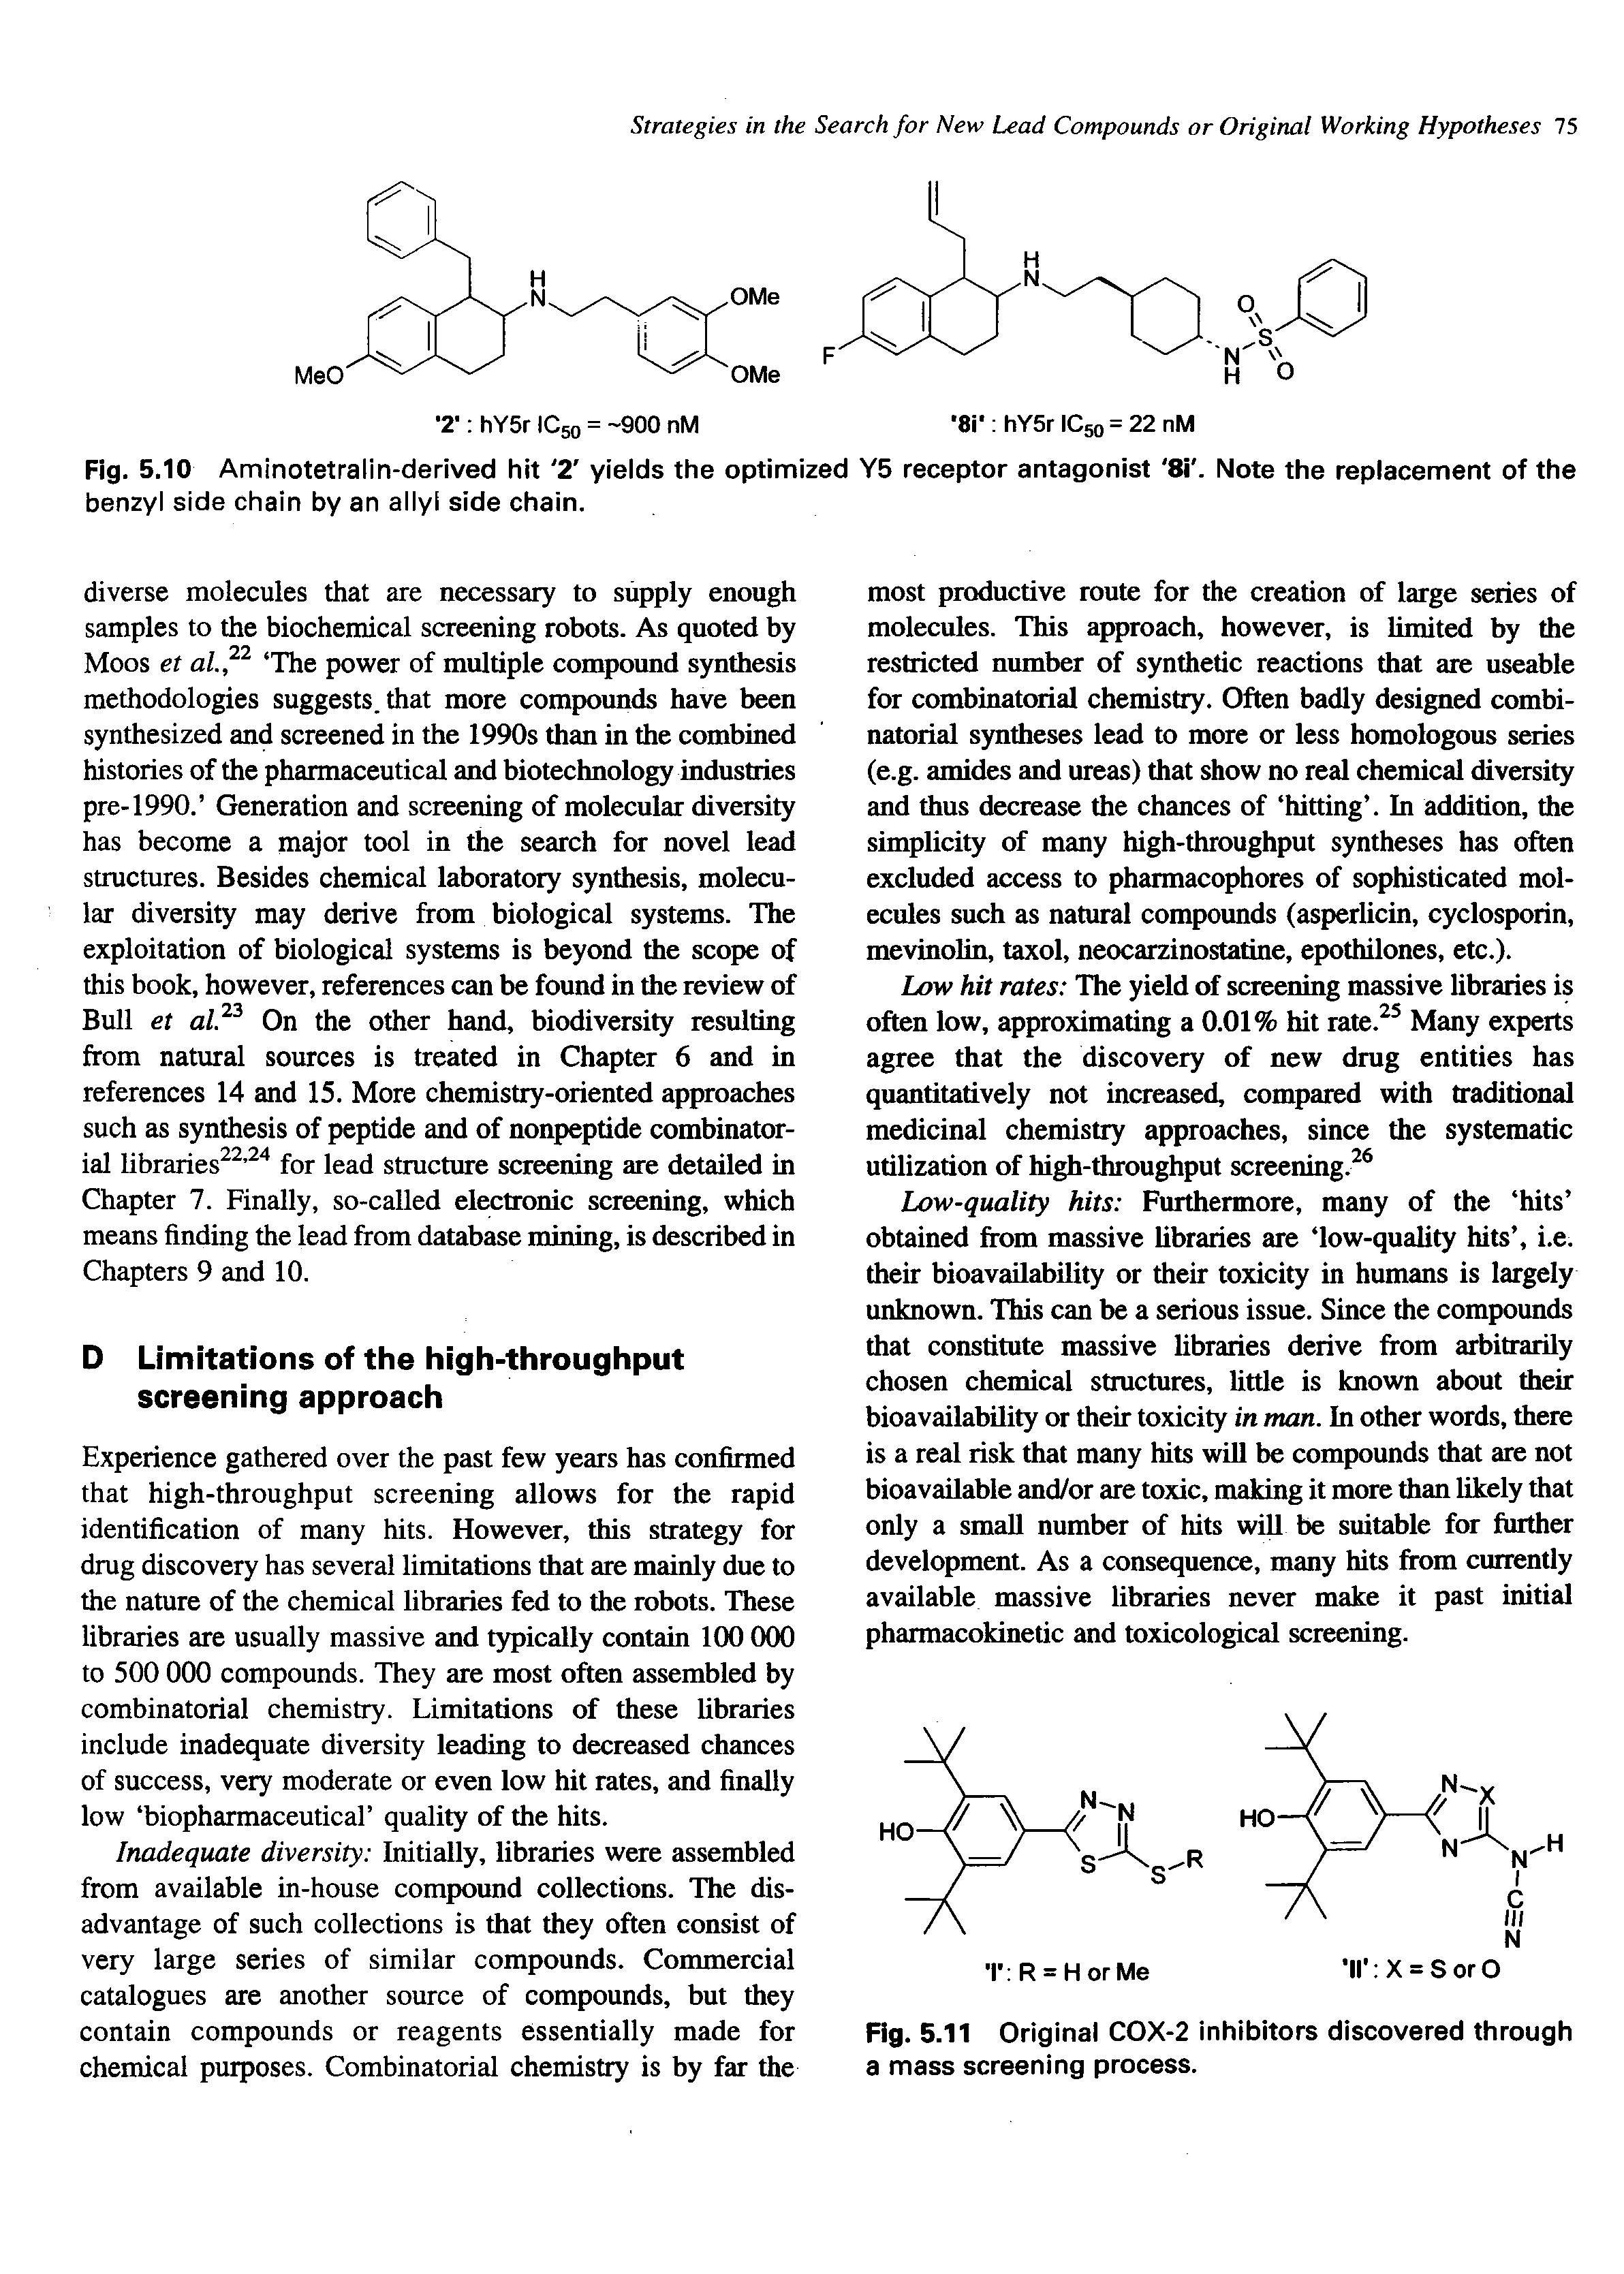 Fig. 5.10 Aminotetralin-derived hit 2 yields the optimized Y5 receptor antagonist 8i. Note the replacement of the benzyl side chain by an ally side chain.